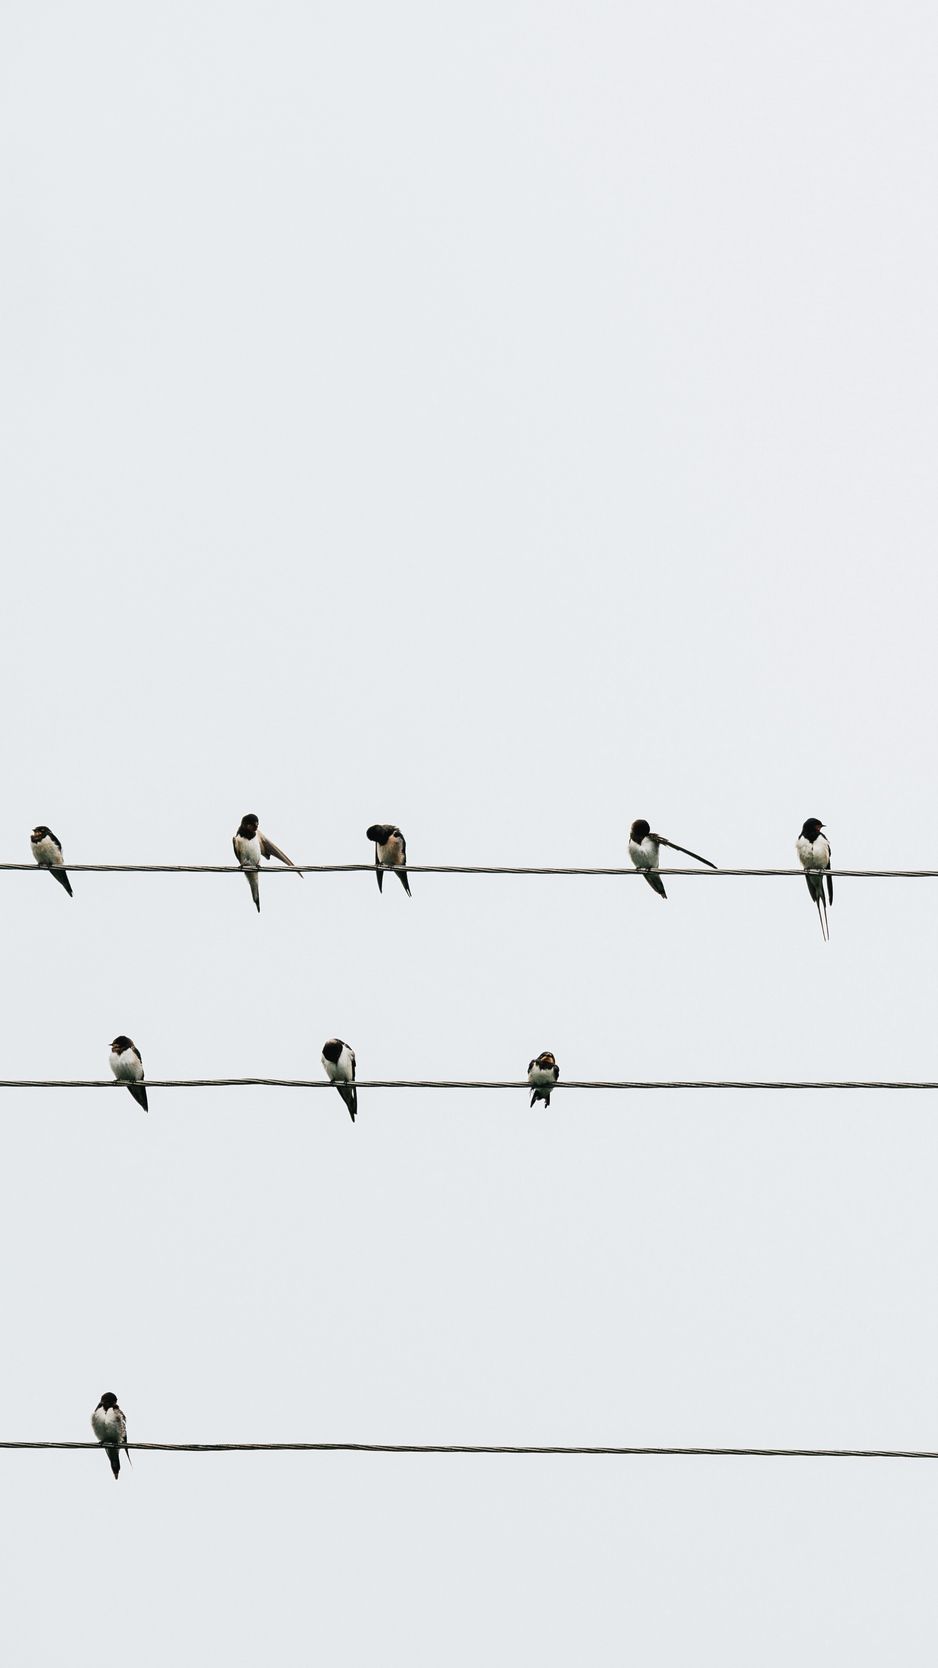 Swallows sitting on wires against the sky - 